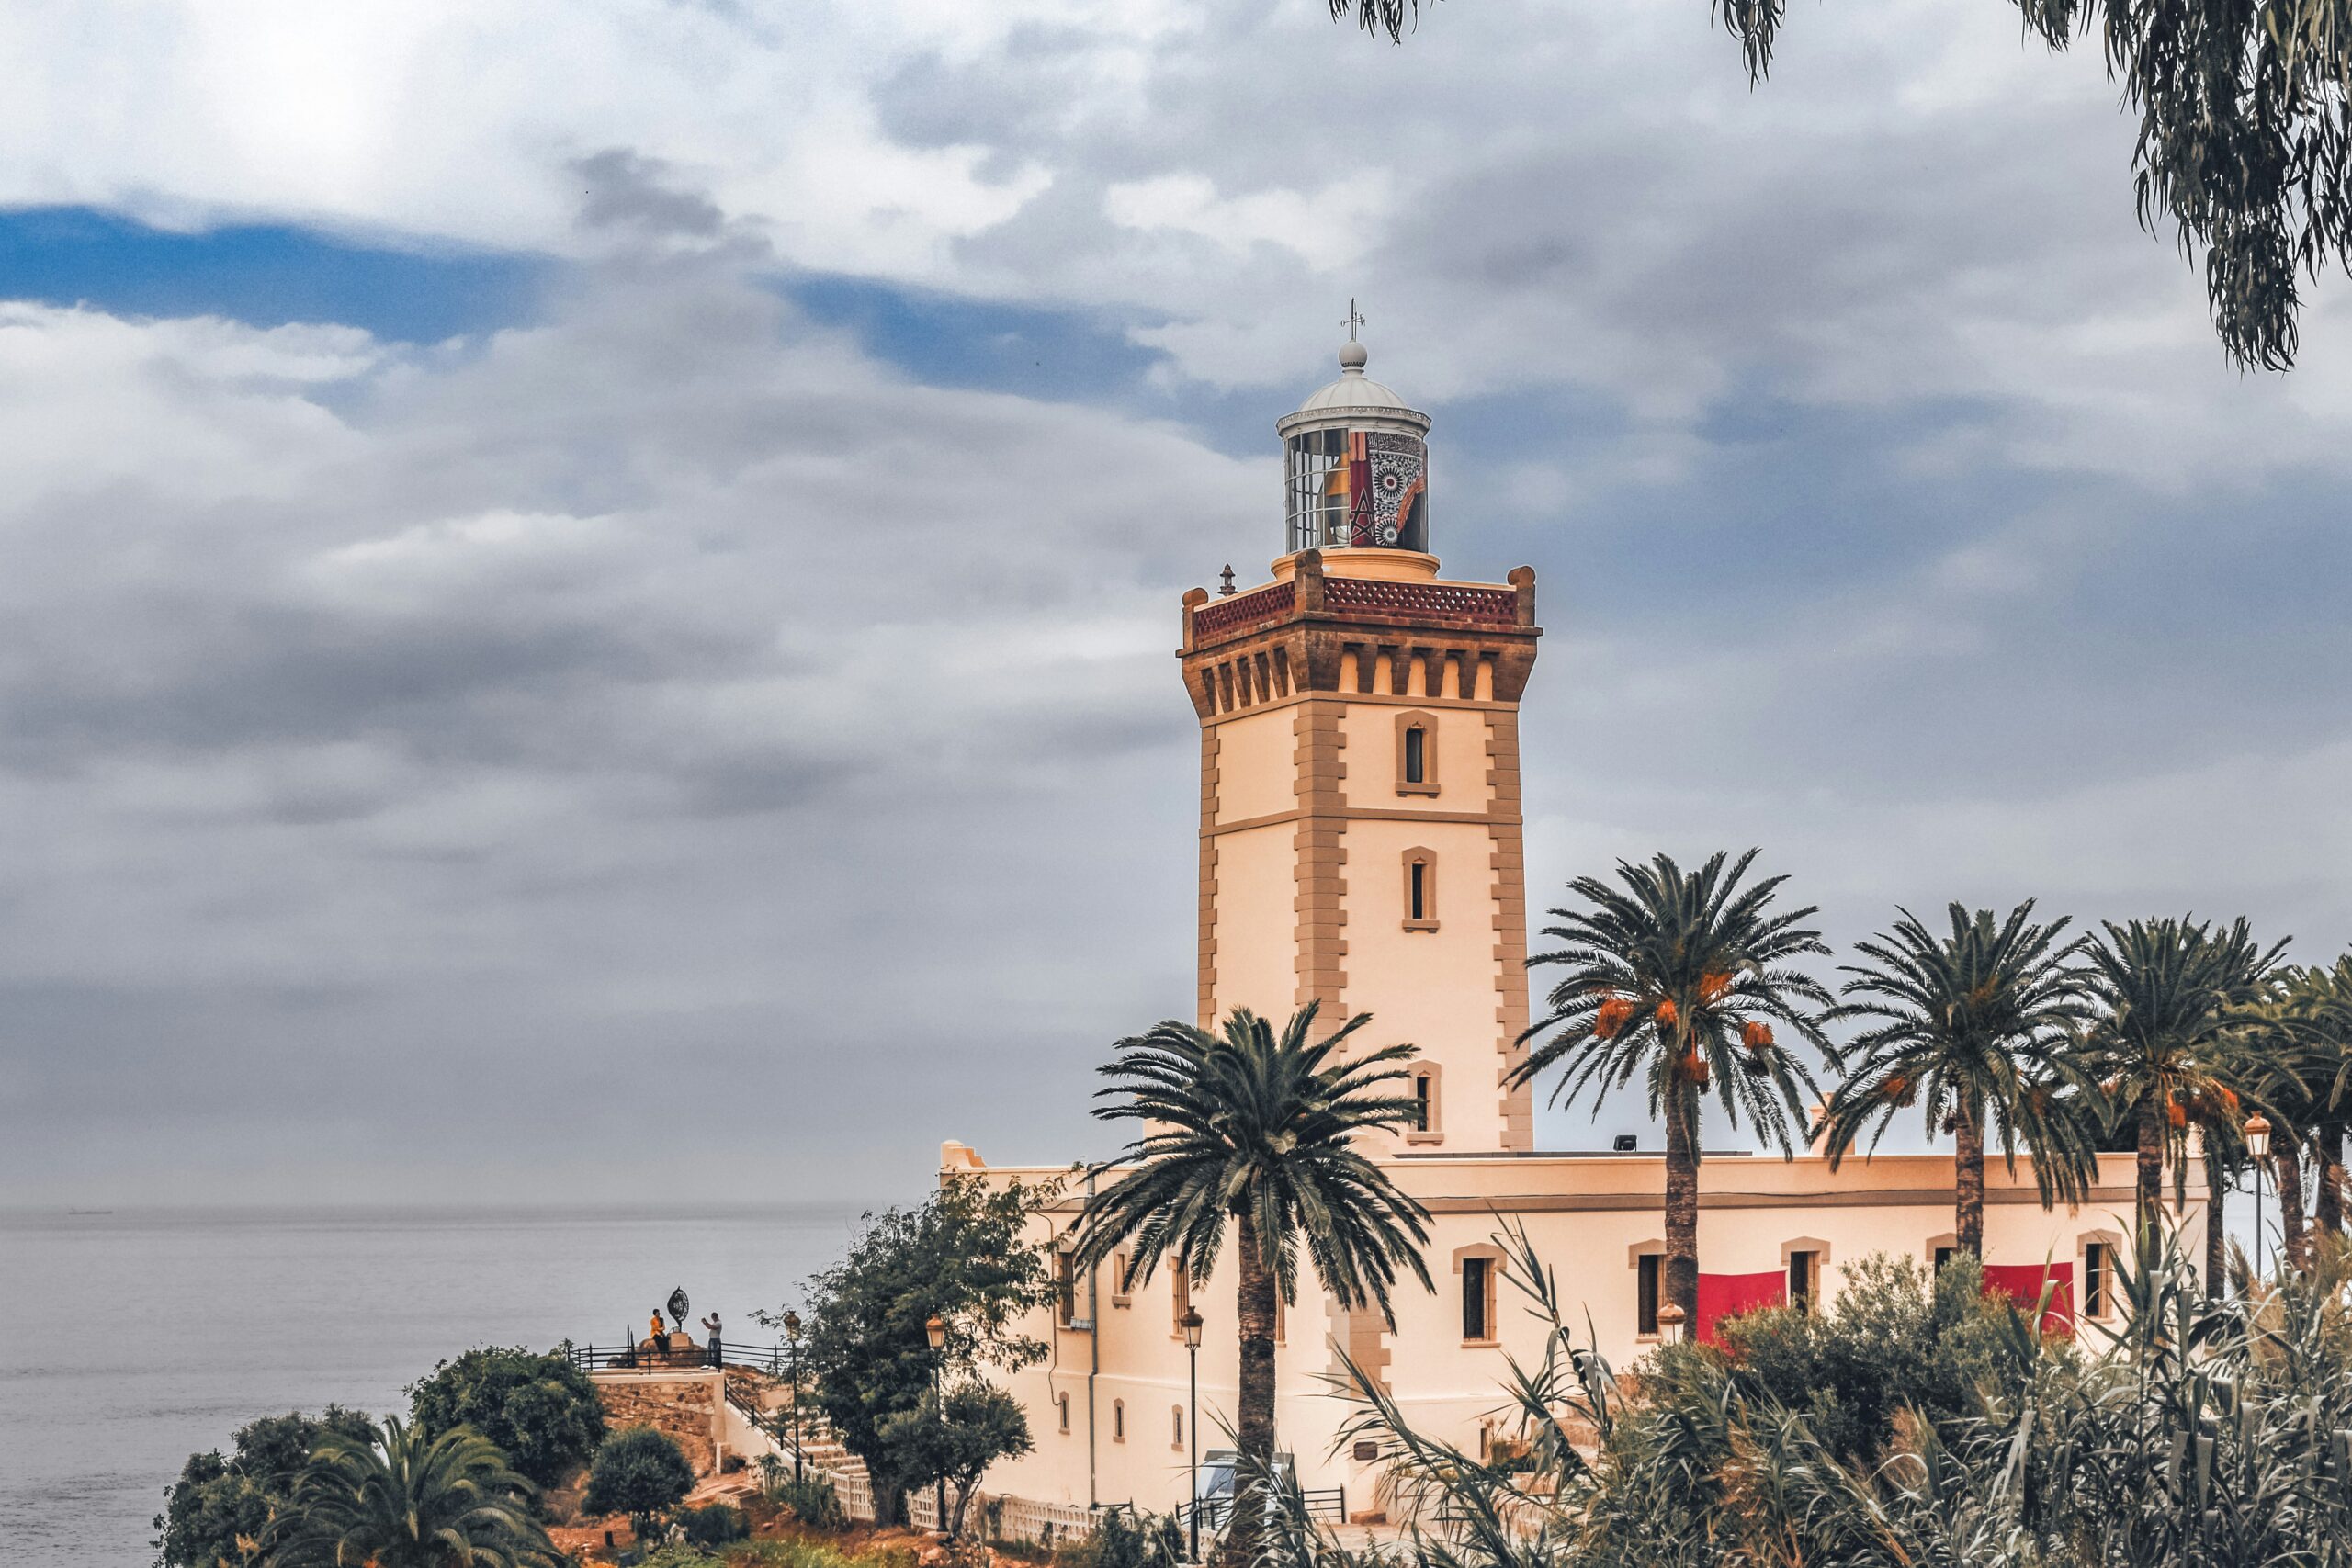 View of a traditional Moroccan tower with a lighthouse against a cloudy sky, surrounded by lush palm trees near the ocean from Morocco